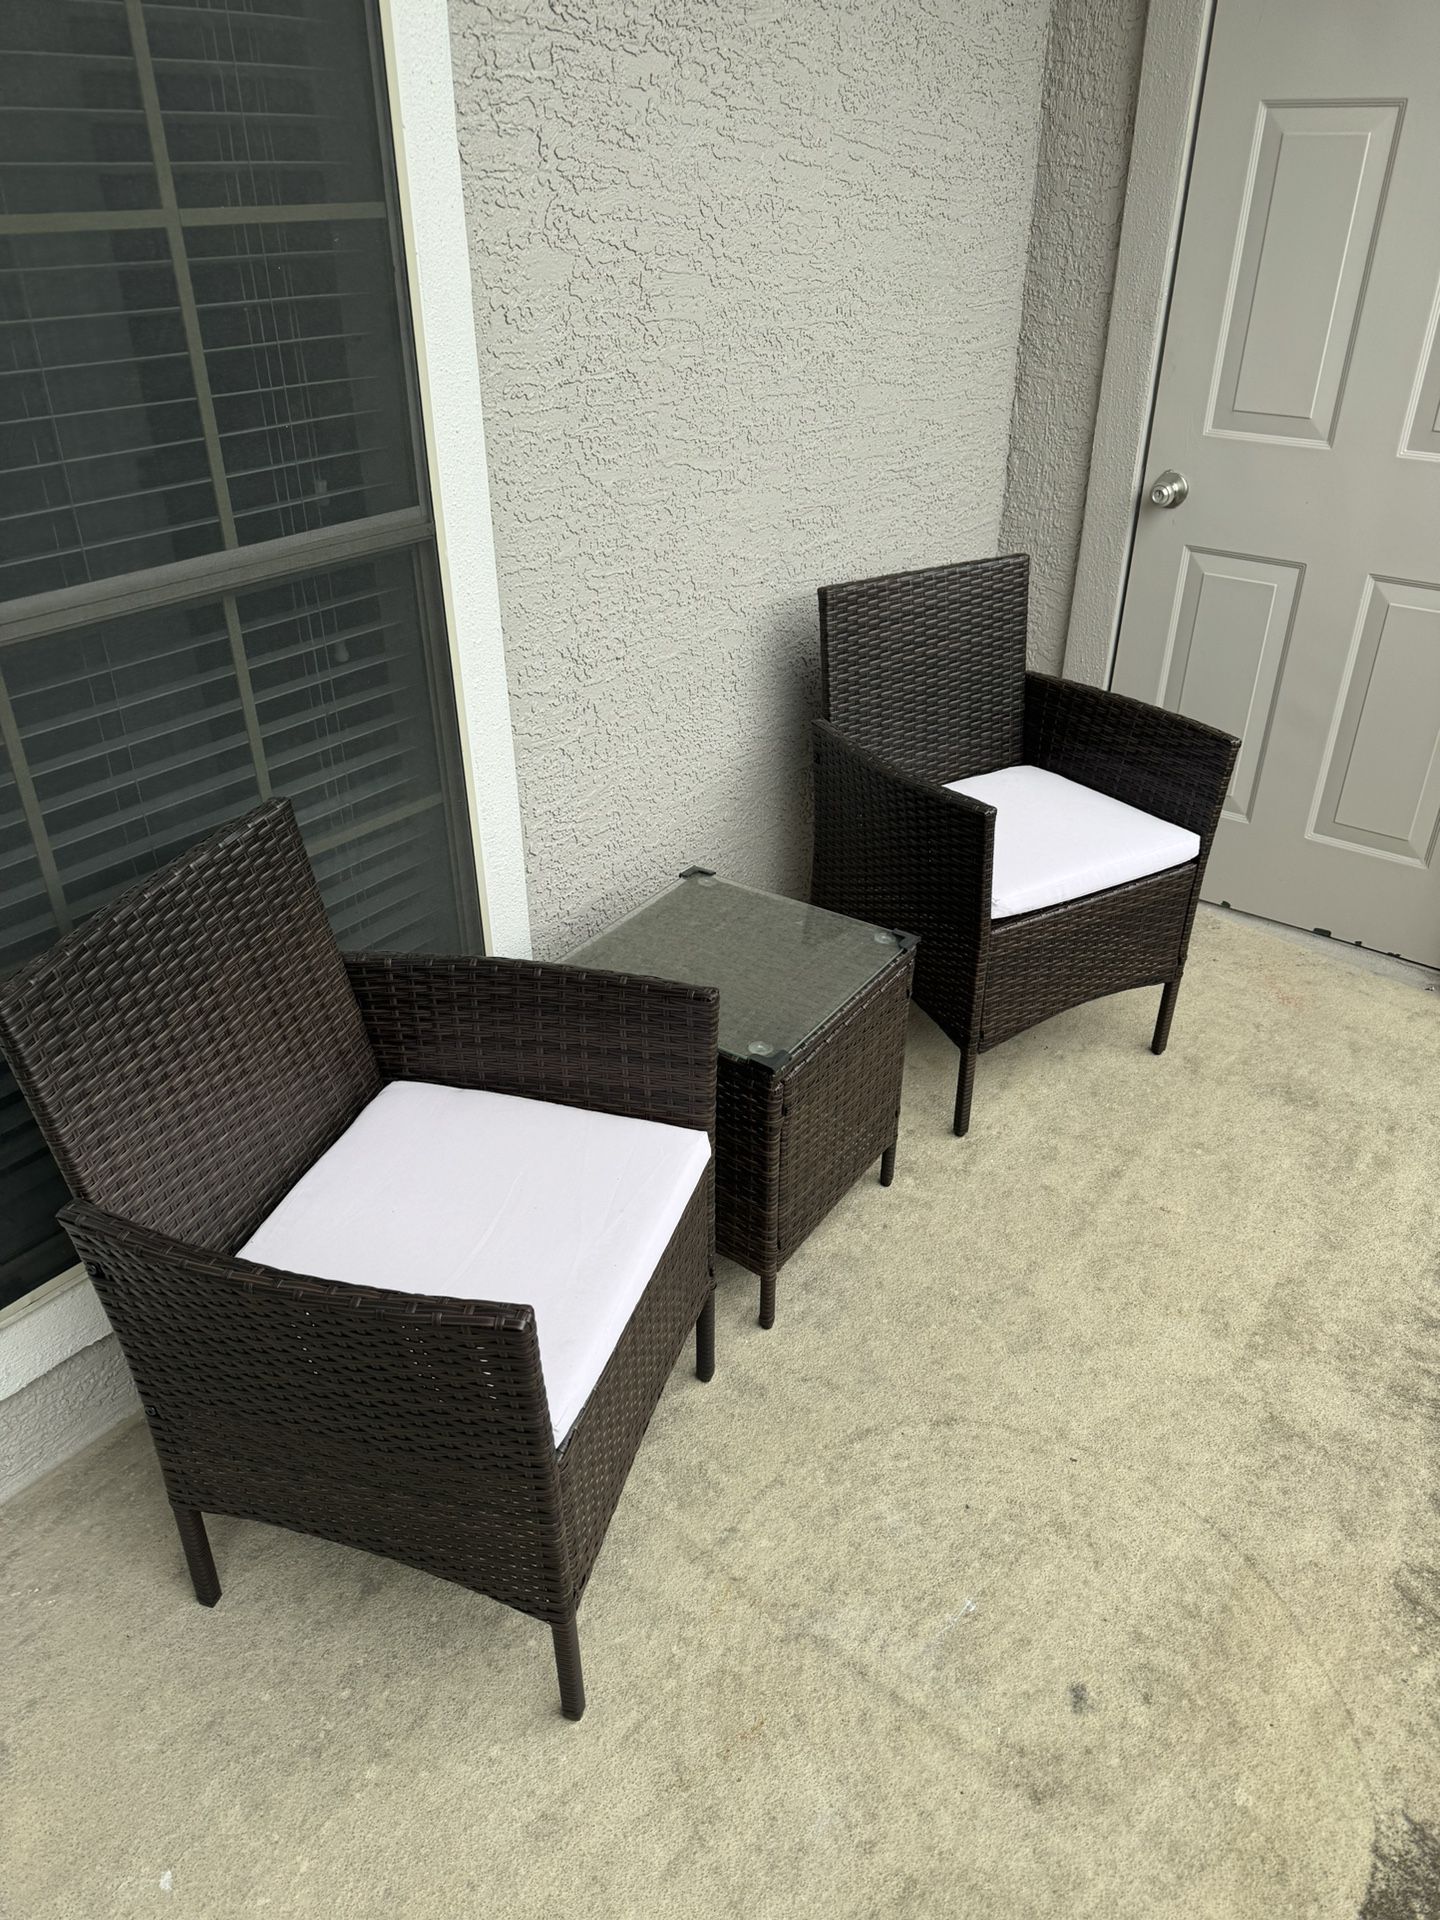 Patio Furniture: 2 Chairs, 1 Table